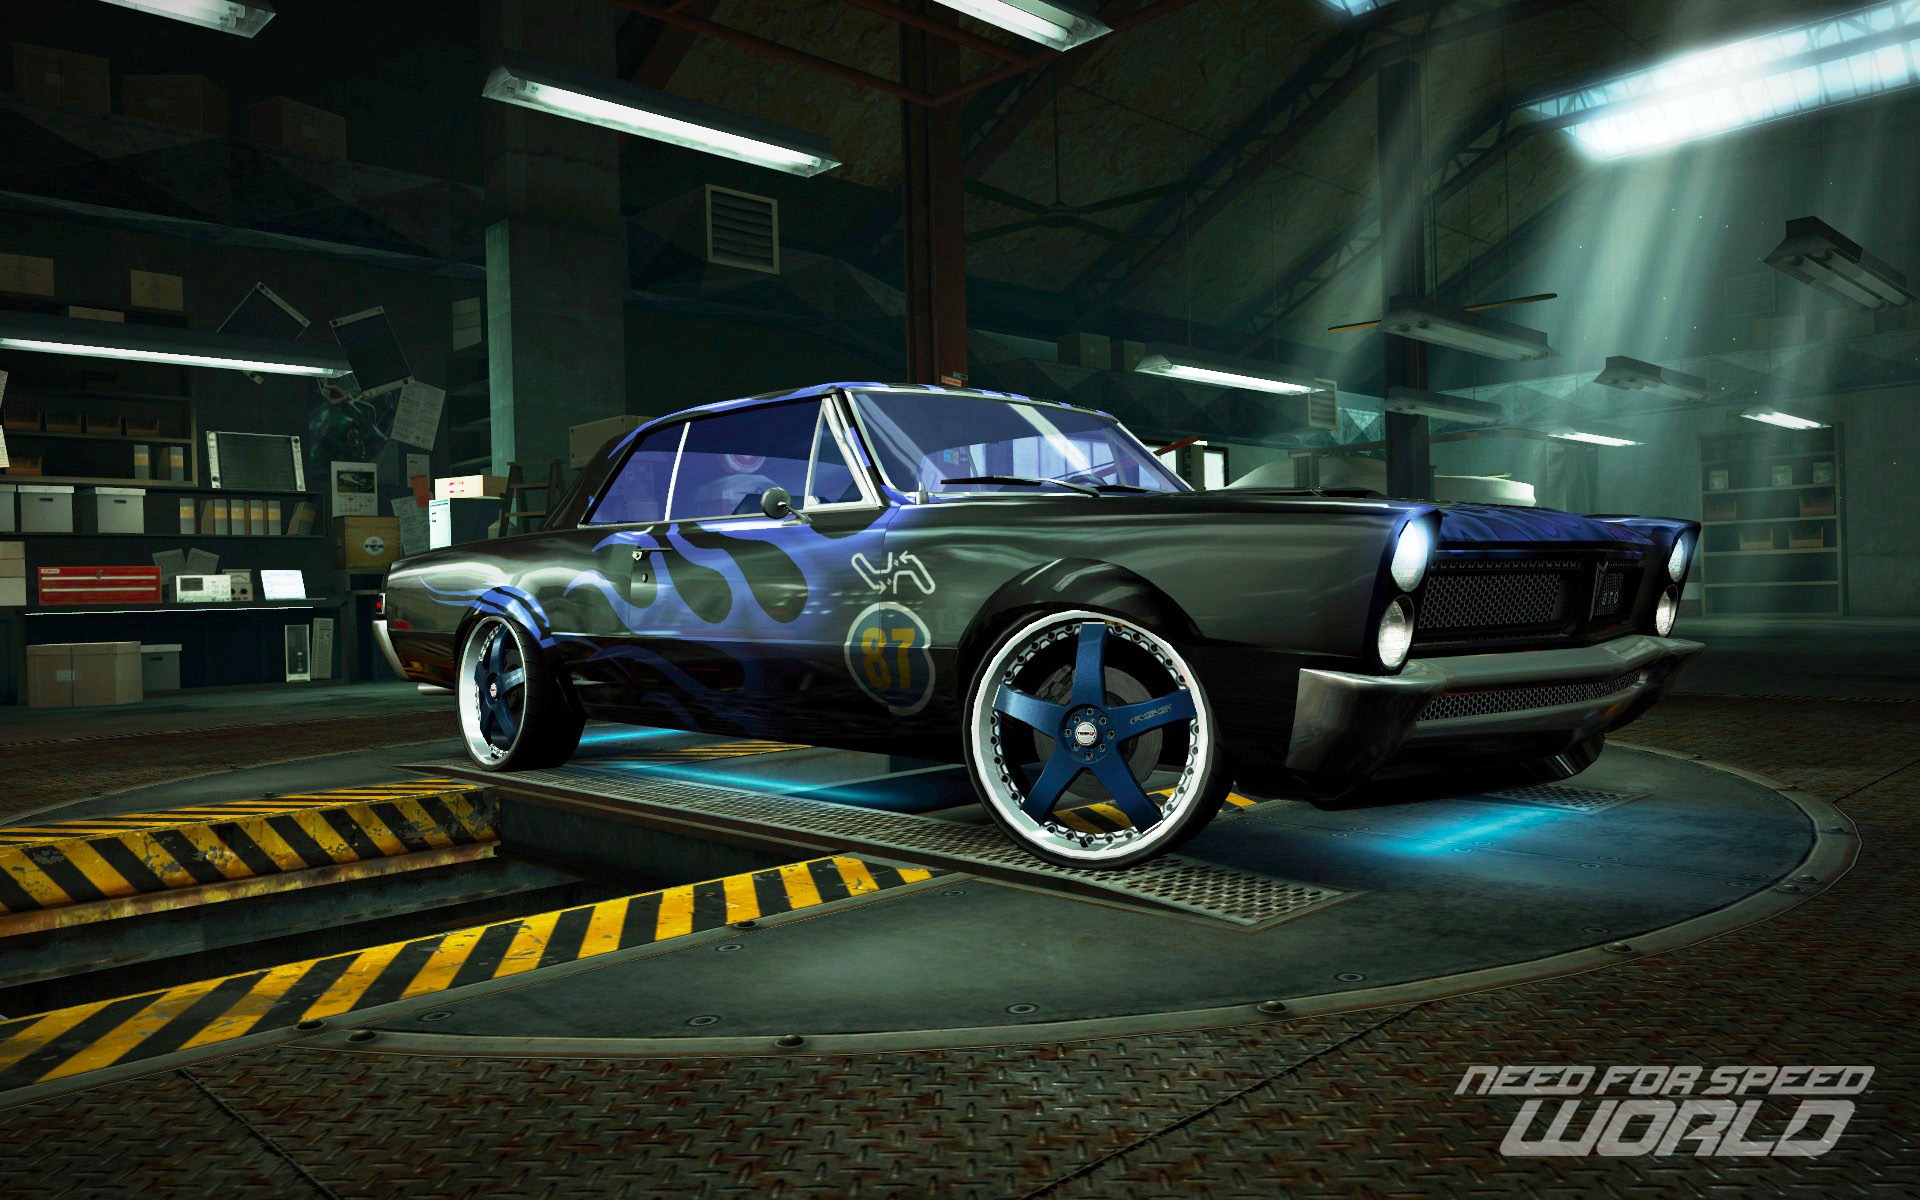 NFSW Images - Need For Speed World - Mod DB